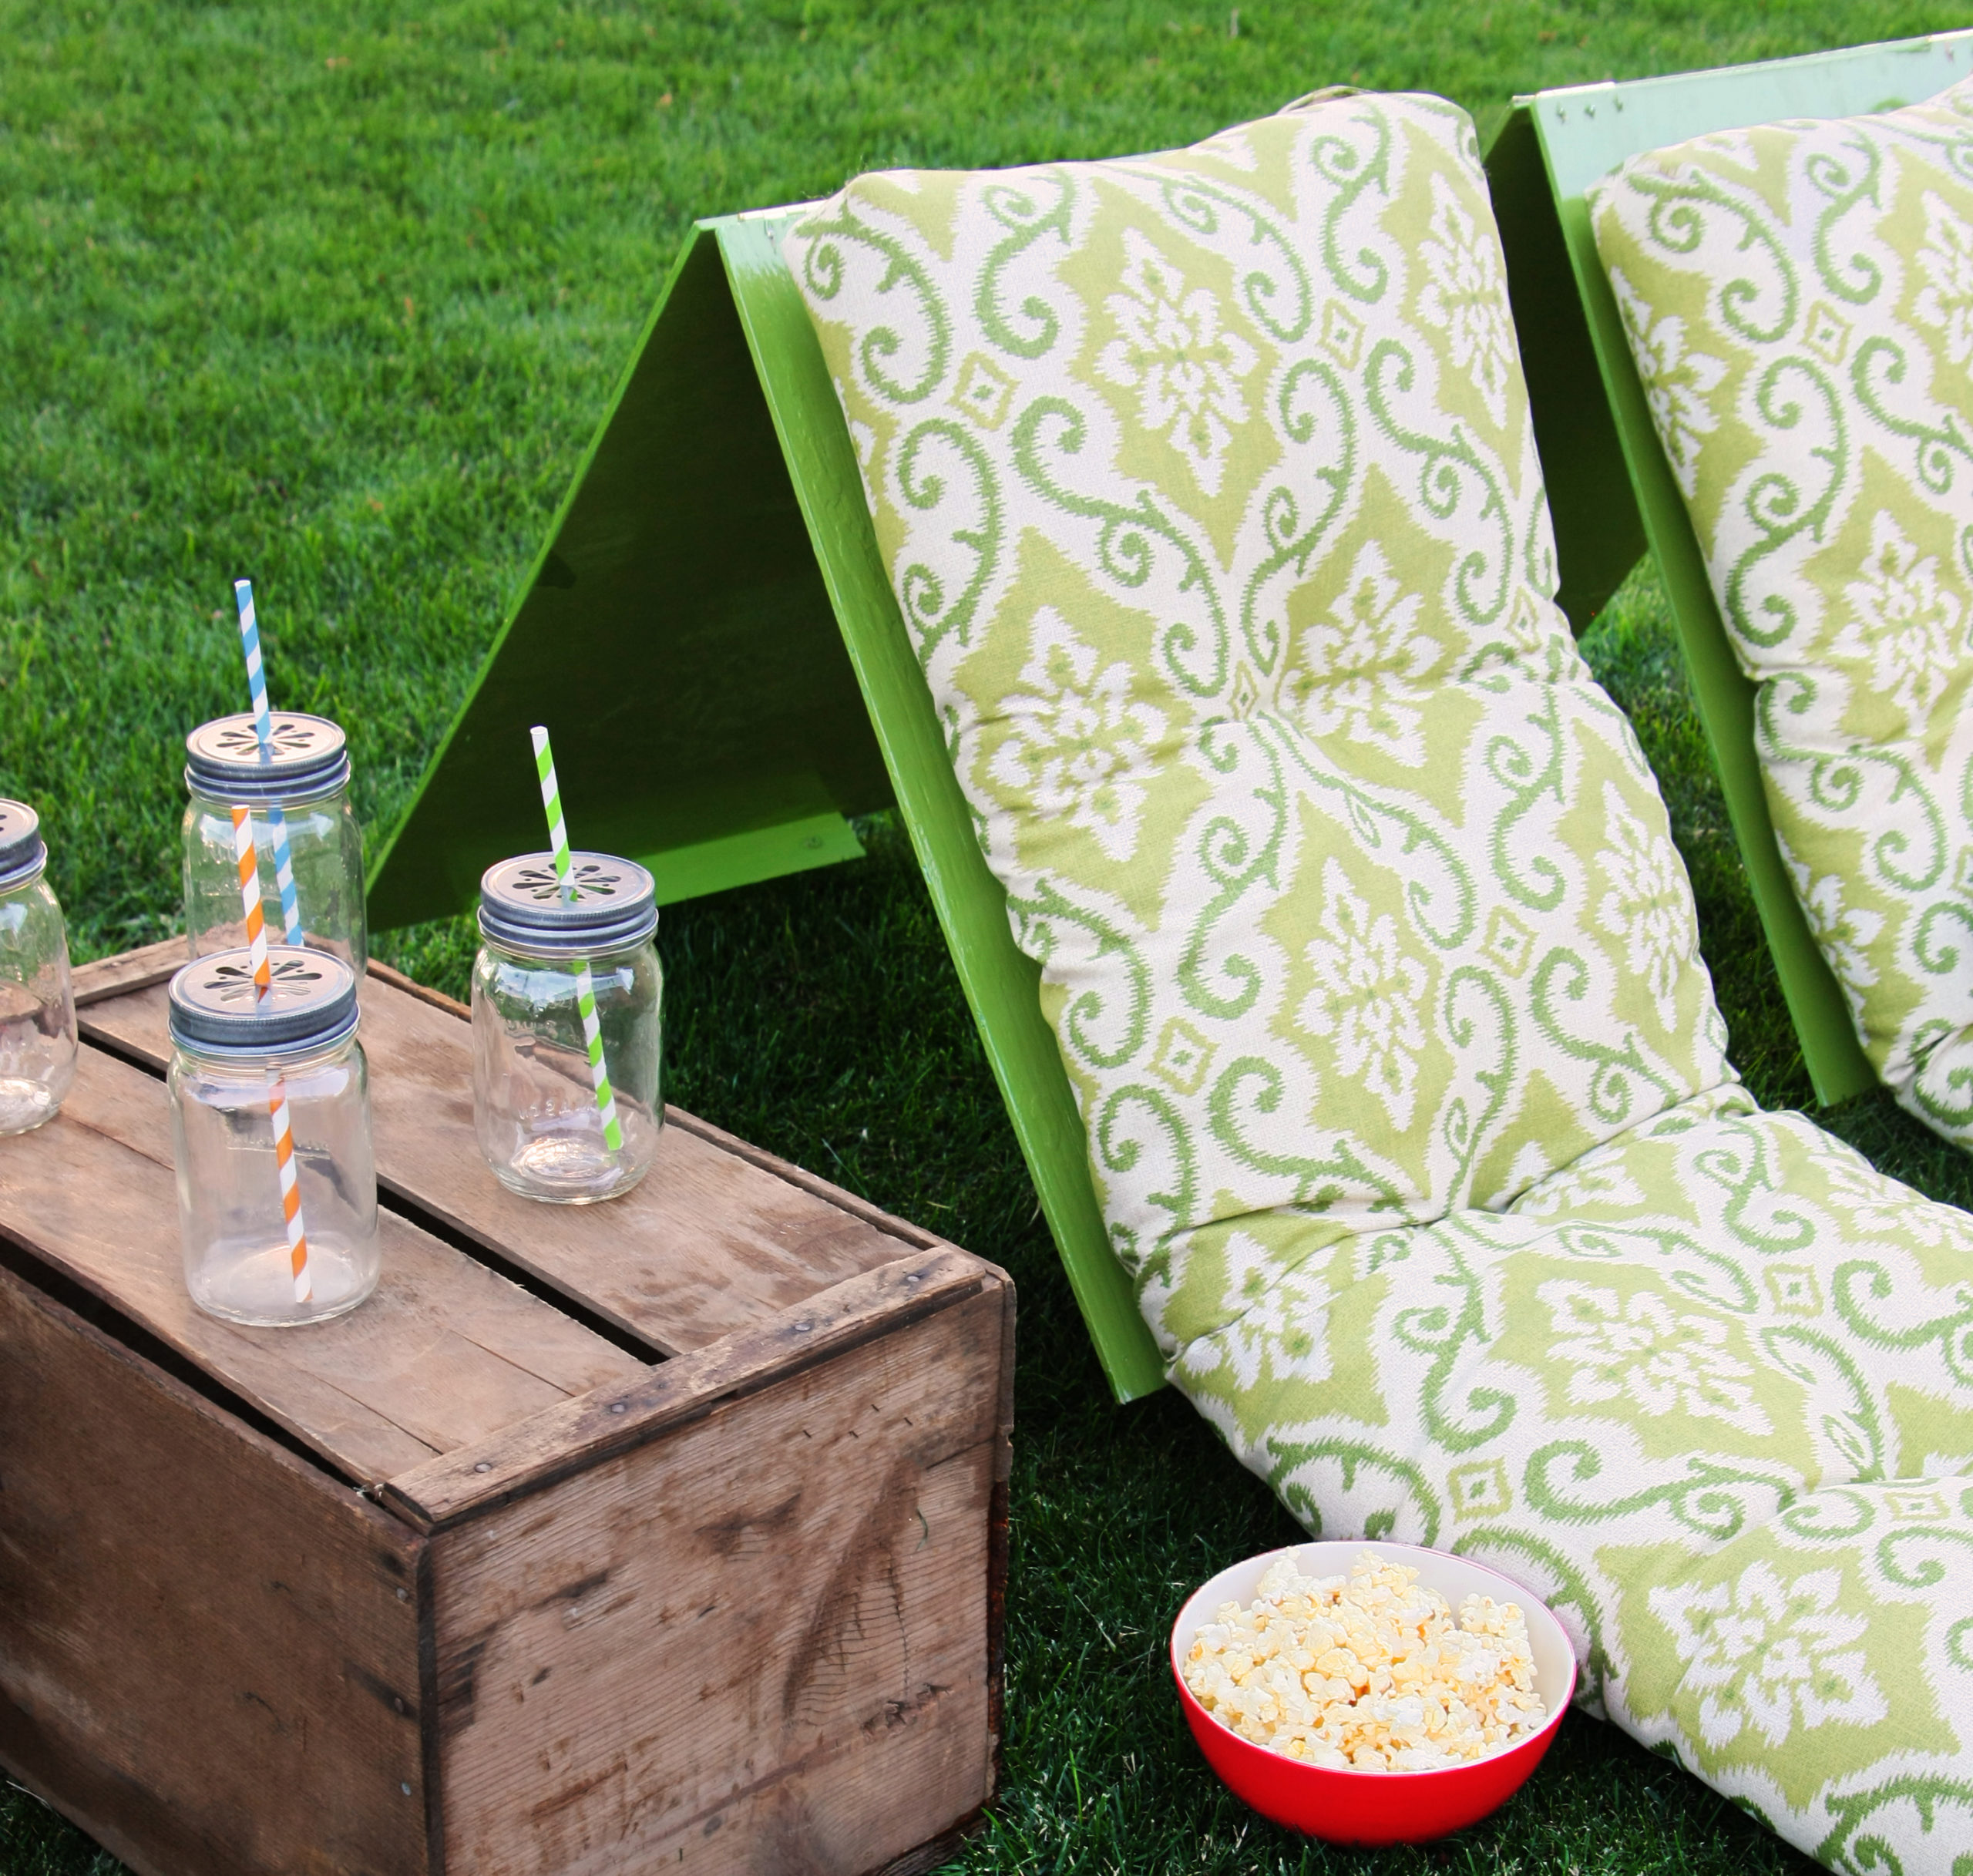 Outdoor Movie Theater Seats - Stacy Risenmay